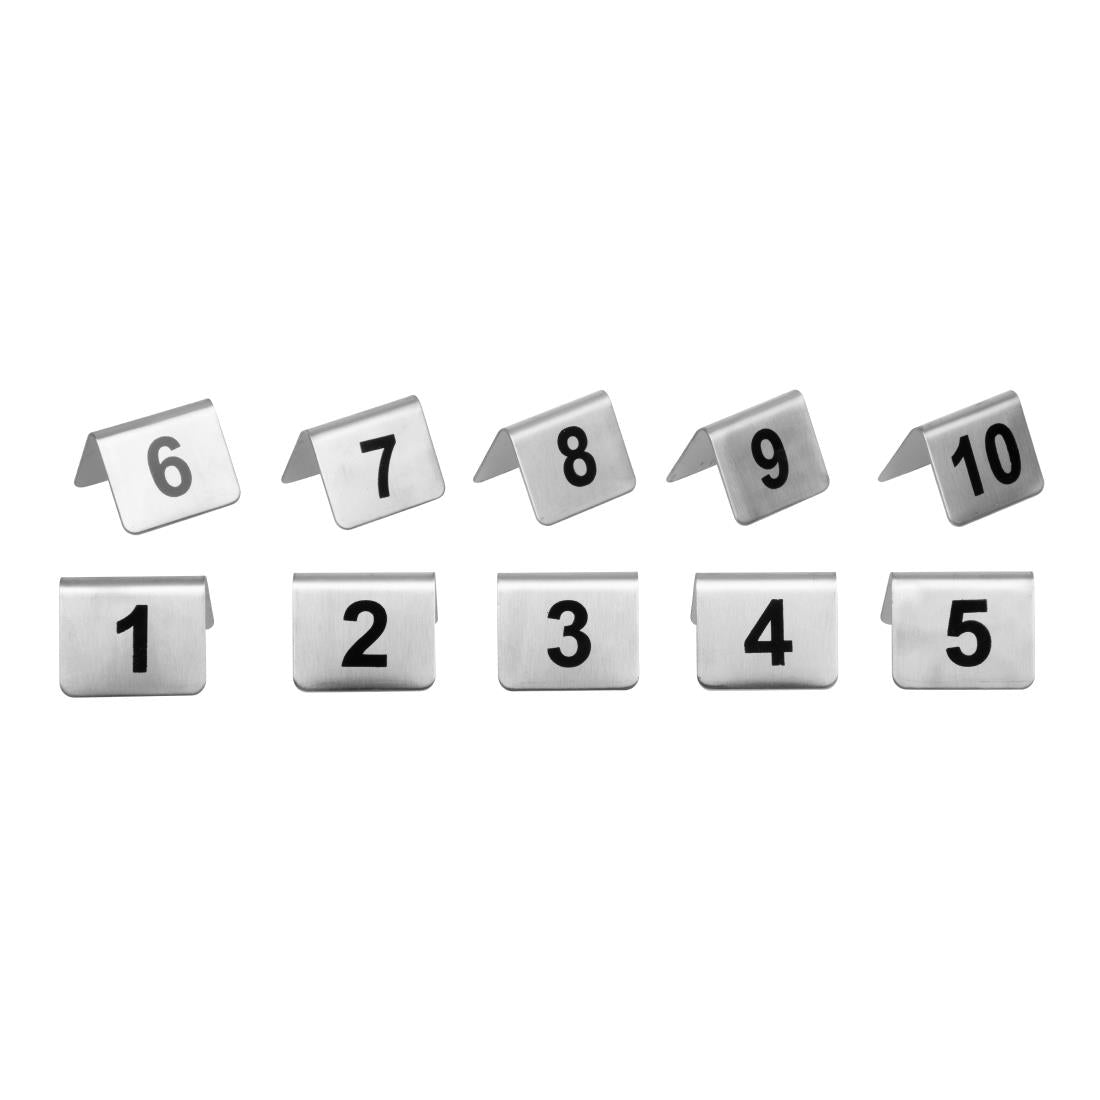 U046 Olympia Stainless Steel Table Numbers 1-10 (Pack of 10)